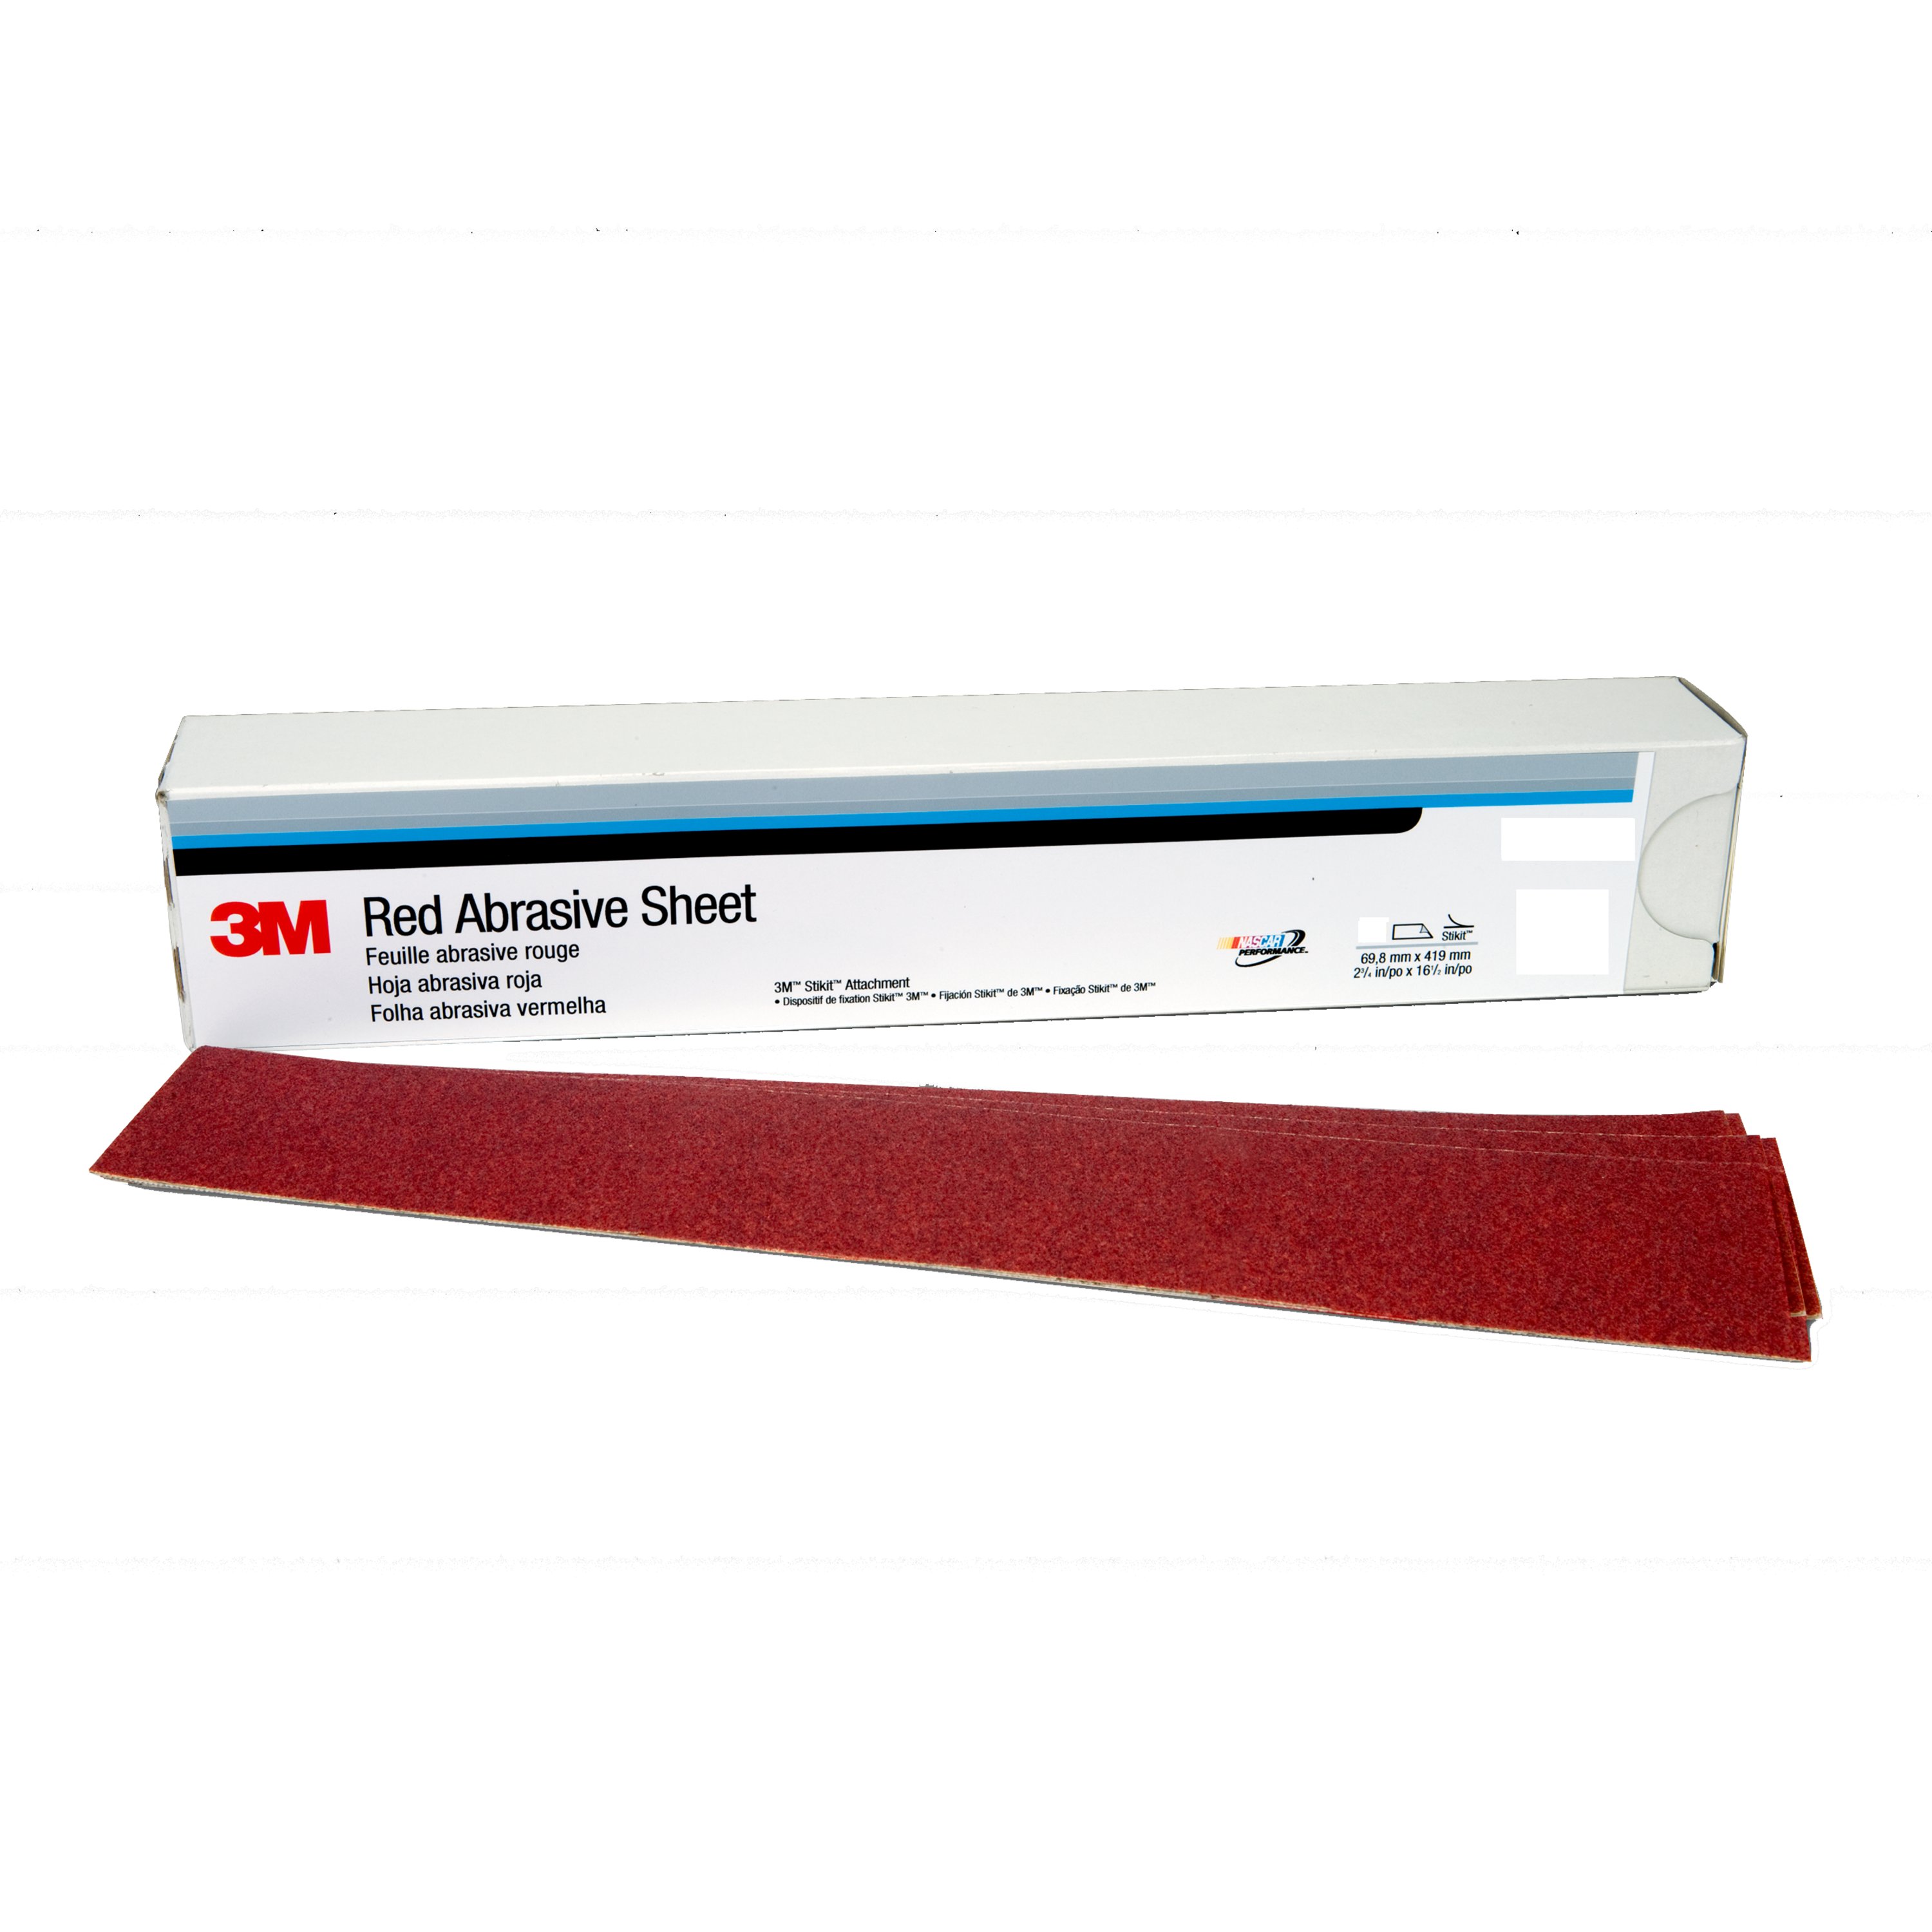 The 3M™ Stikit™ Red Abrasive Sheet 316U delivers best-in-class performance on collision repair substrates, yet remains a high value choice for collision repair operations.